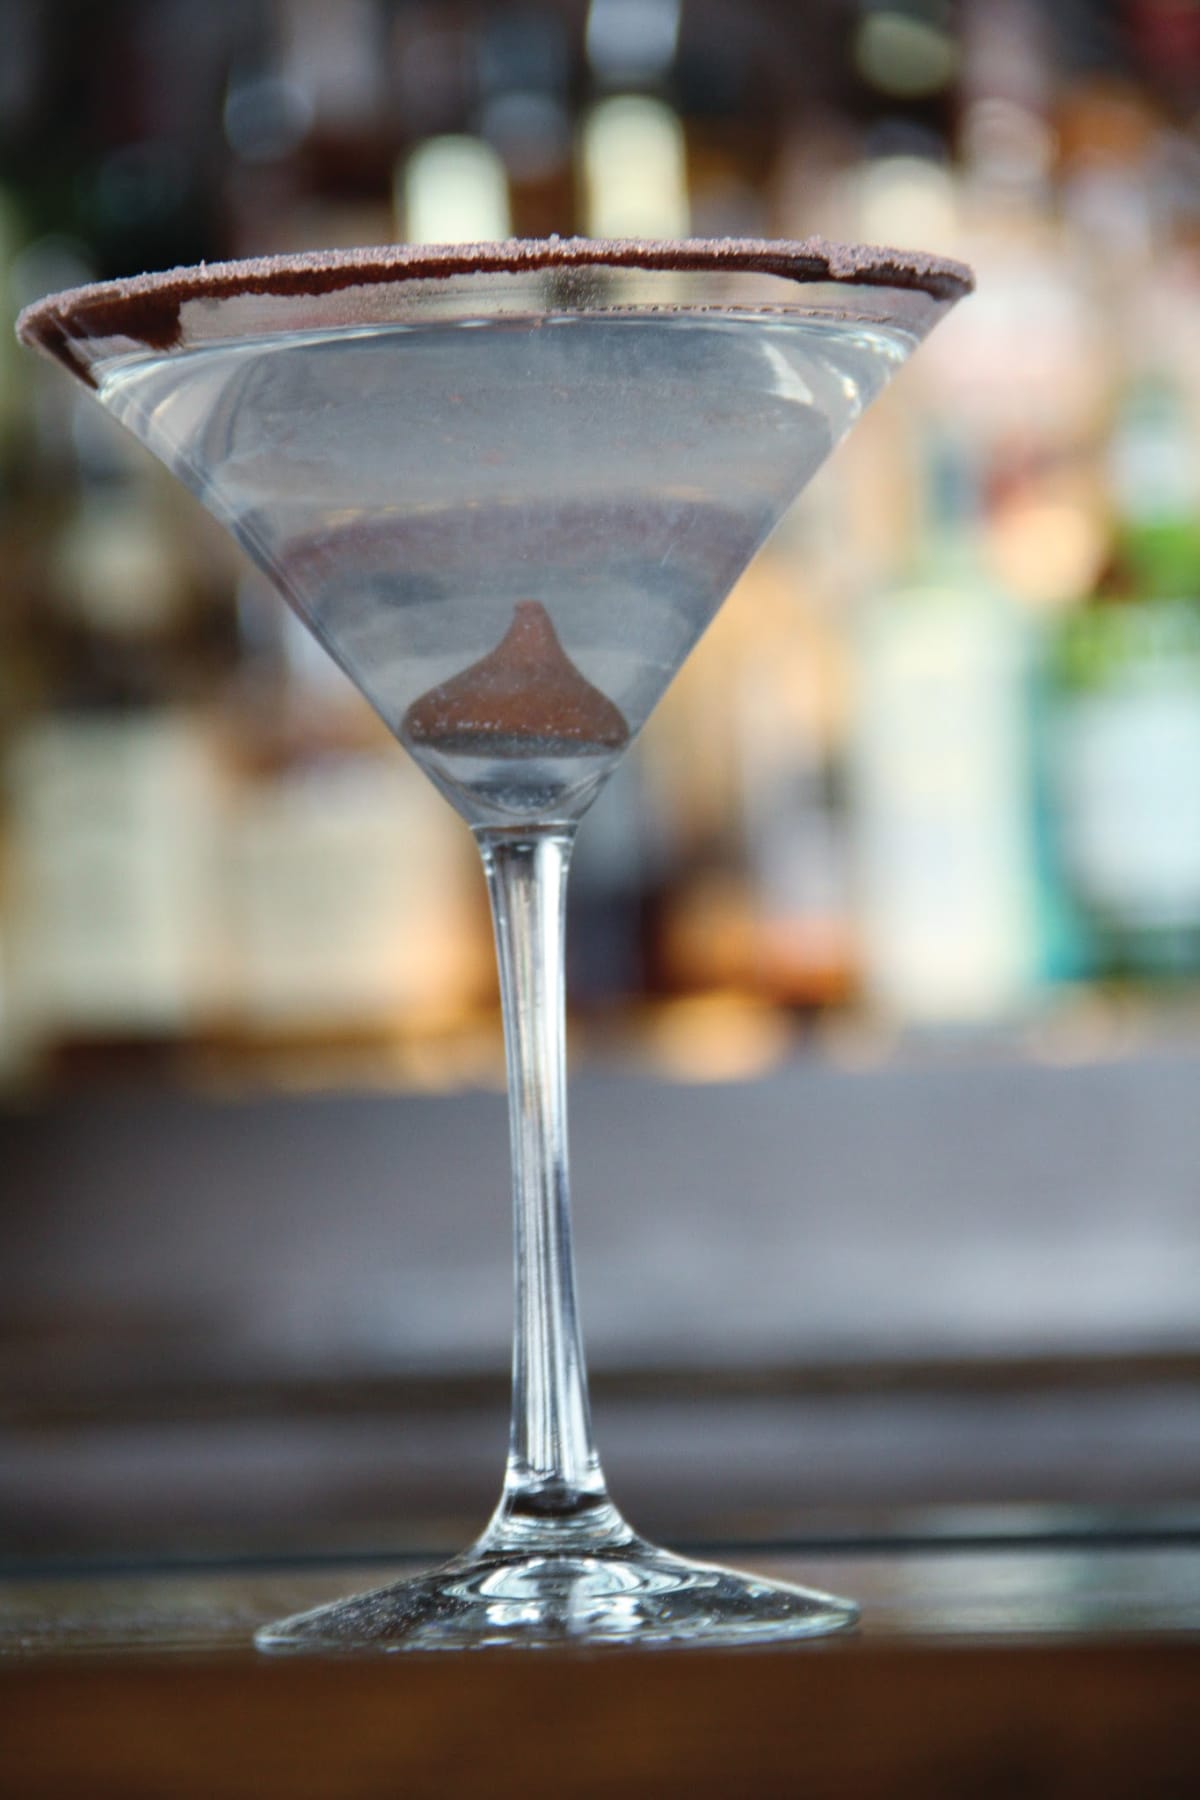 Mom and dad might like a chocolate-themed cocktail while visiting Hershey, Pennsylvania with kids